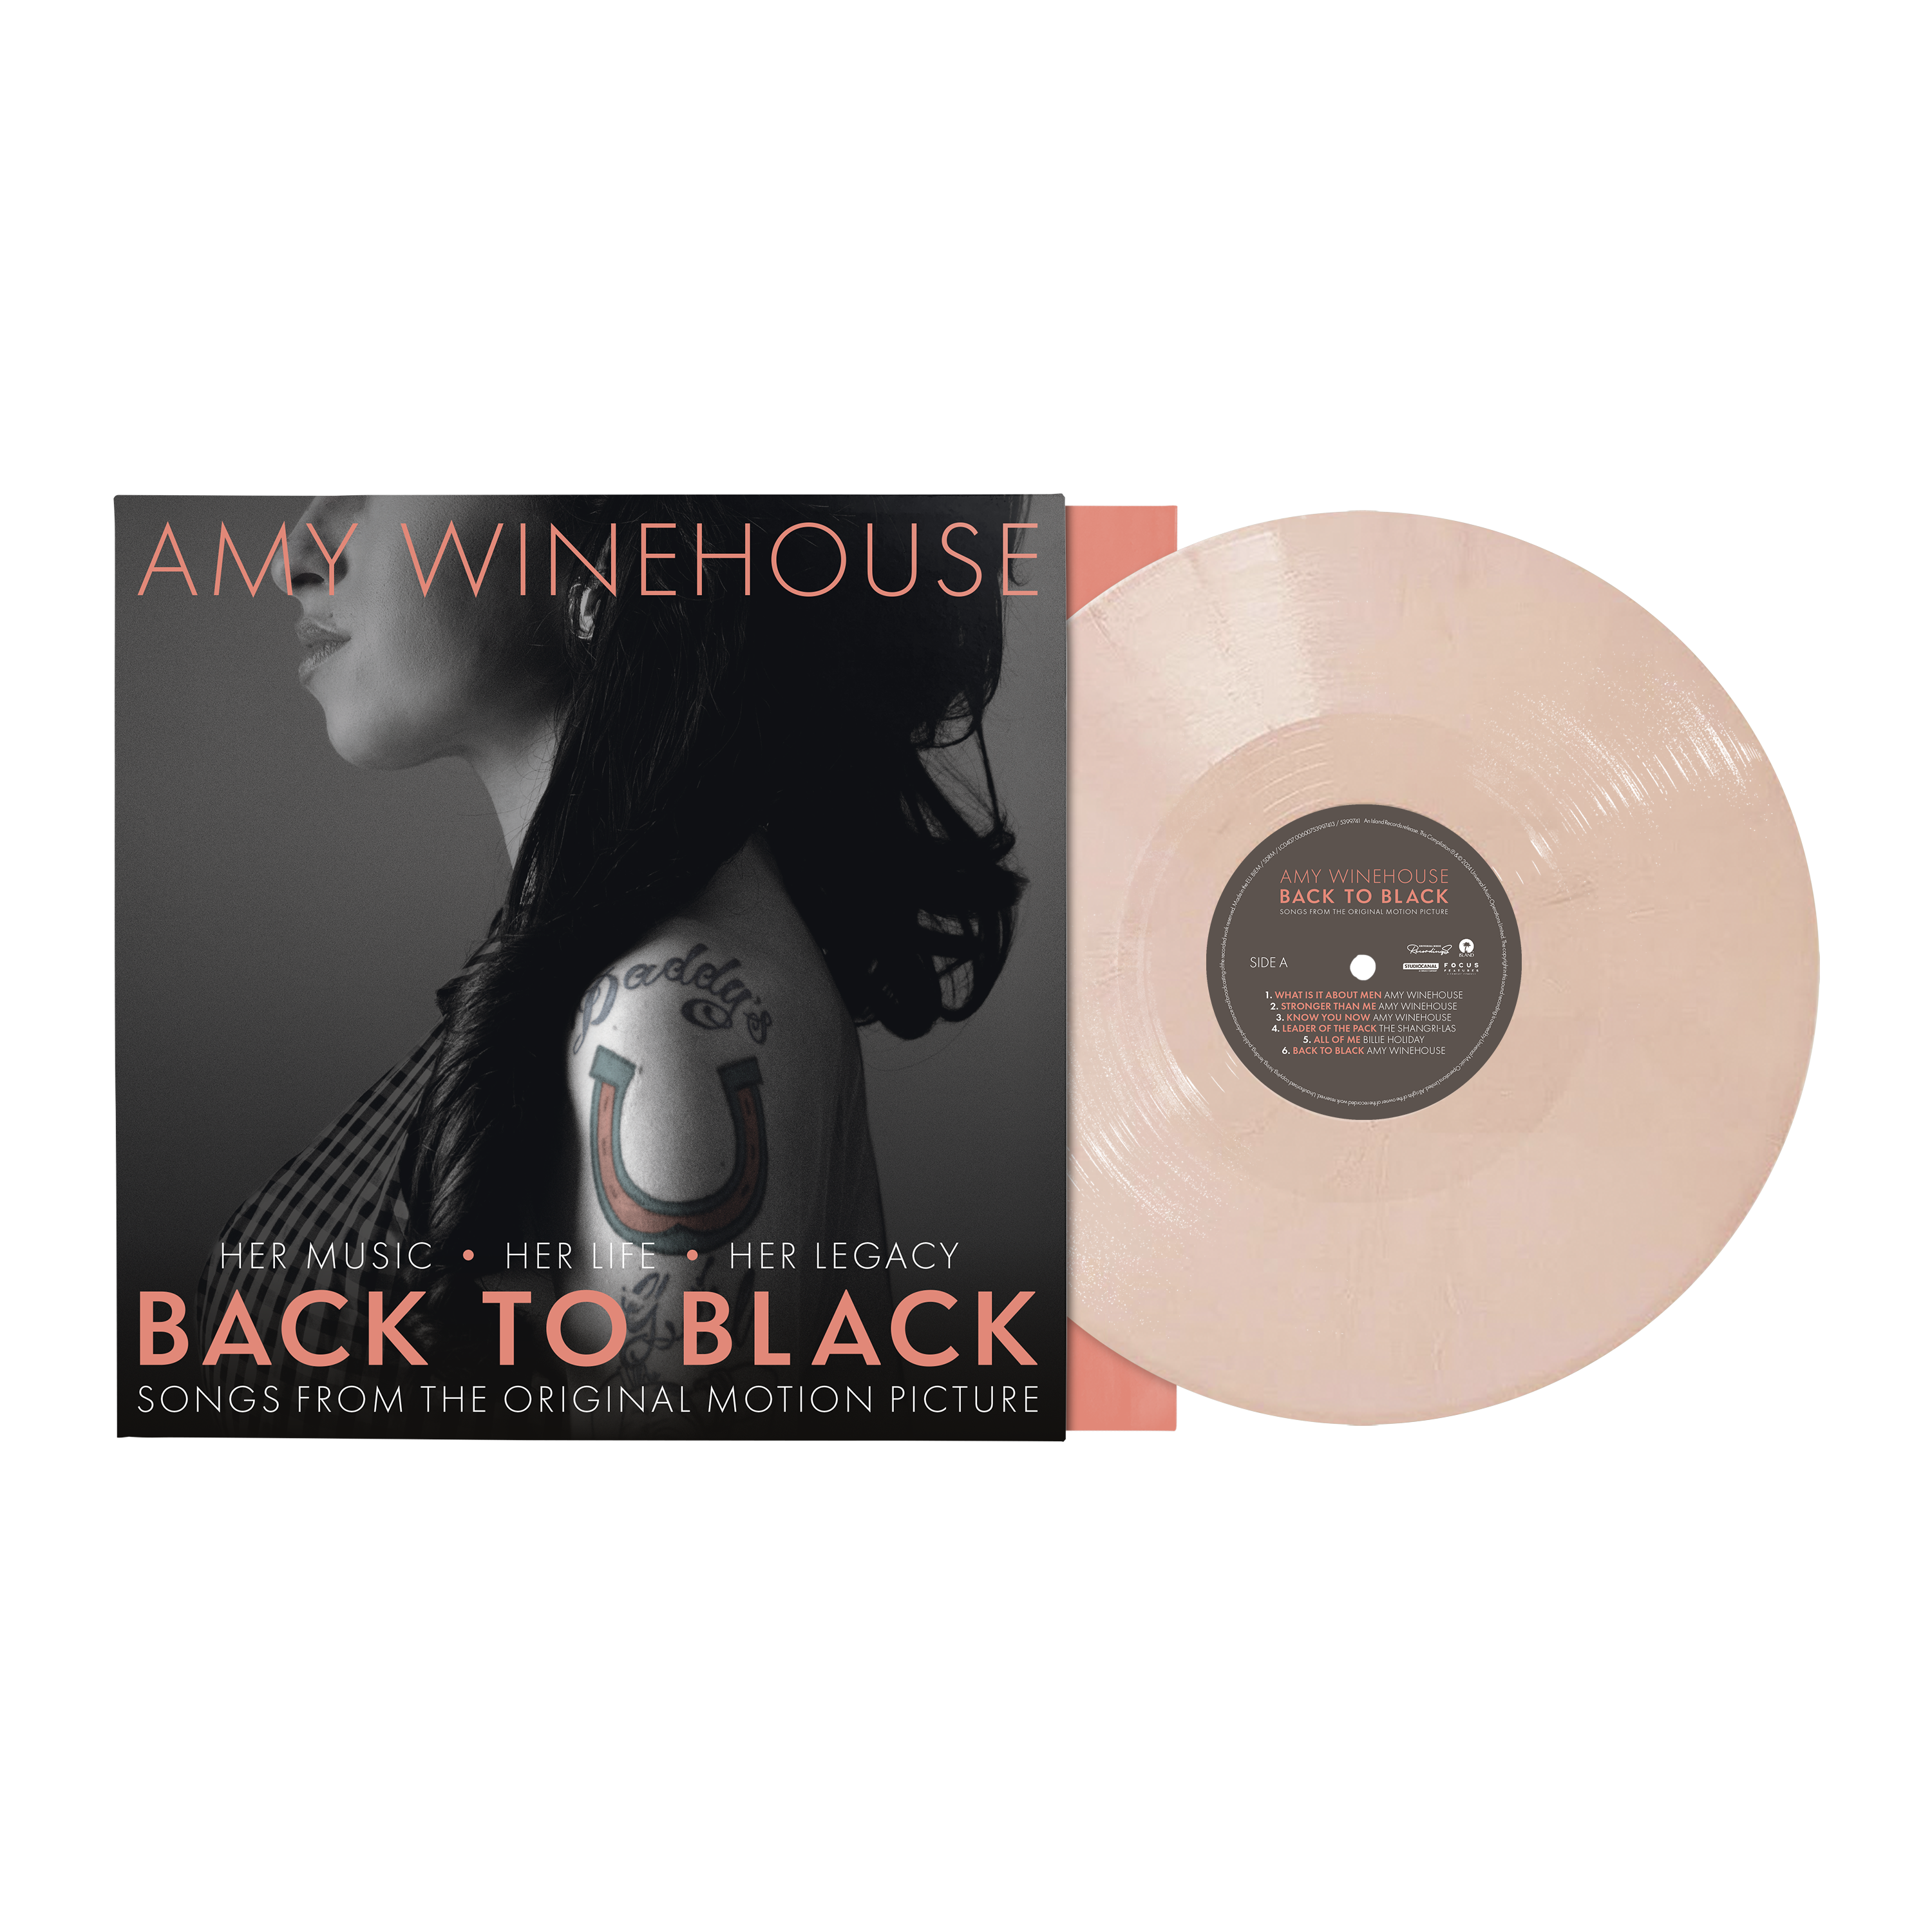 Back To Black - Songs From The Original Motion Picture: Exclusive Peach Vinyl LP + Back To Black Portrait Washed T-Shirt